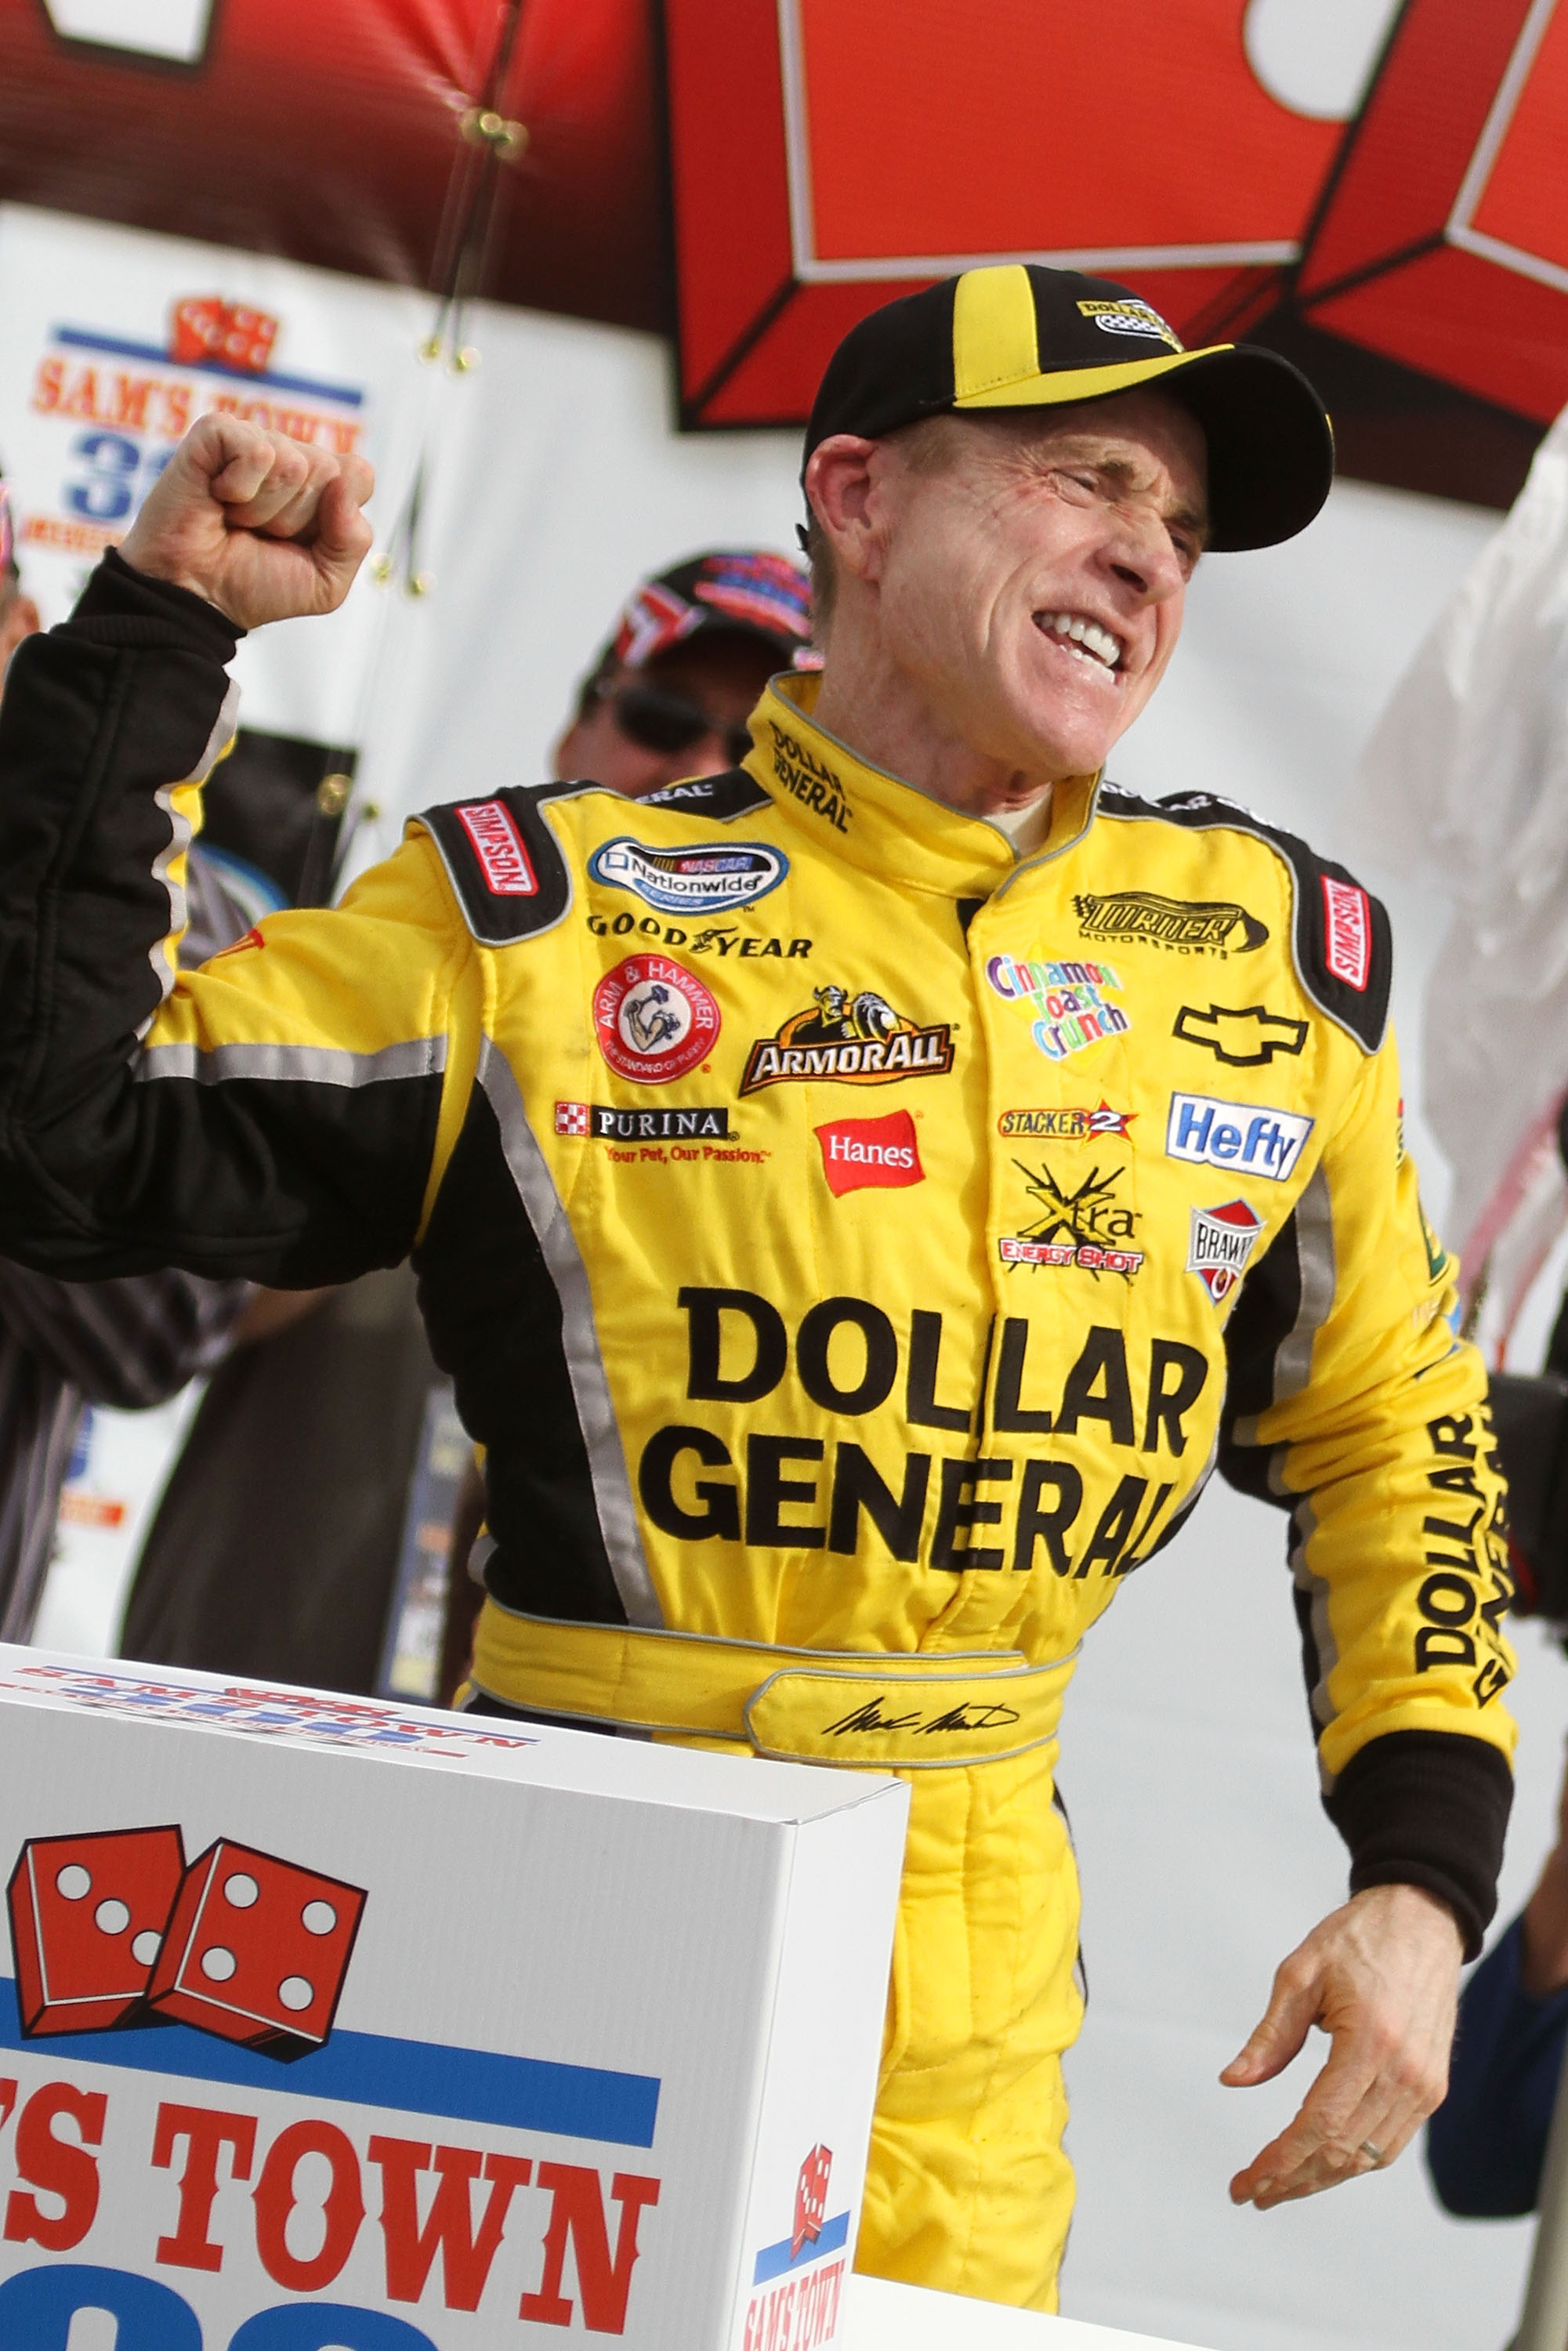 LAS VEGAS, NV - MARCH 05:  Mark Martin, driver of the #32 Dollar General Chevrolet, celebrates in Victory Lane after winning the NASCAR Nationwide Series Sam's Town 300 at Las Vegas Motor Speedway on March 5, 2011 in Las Vegas, Nevada.  (Photo by Jerry Ma